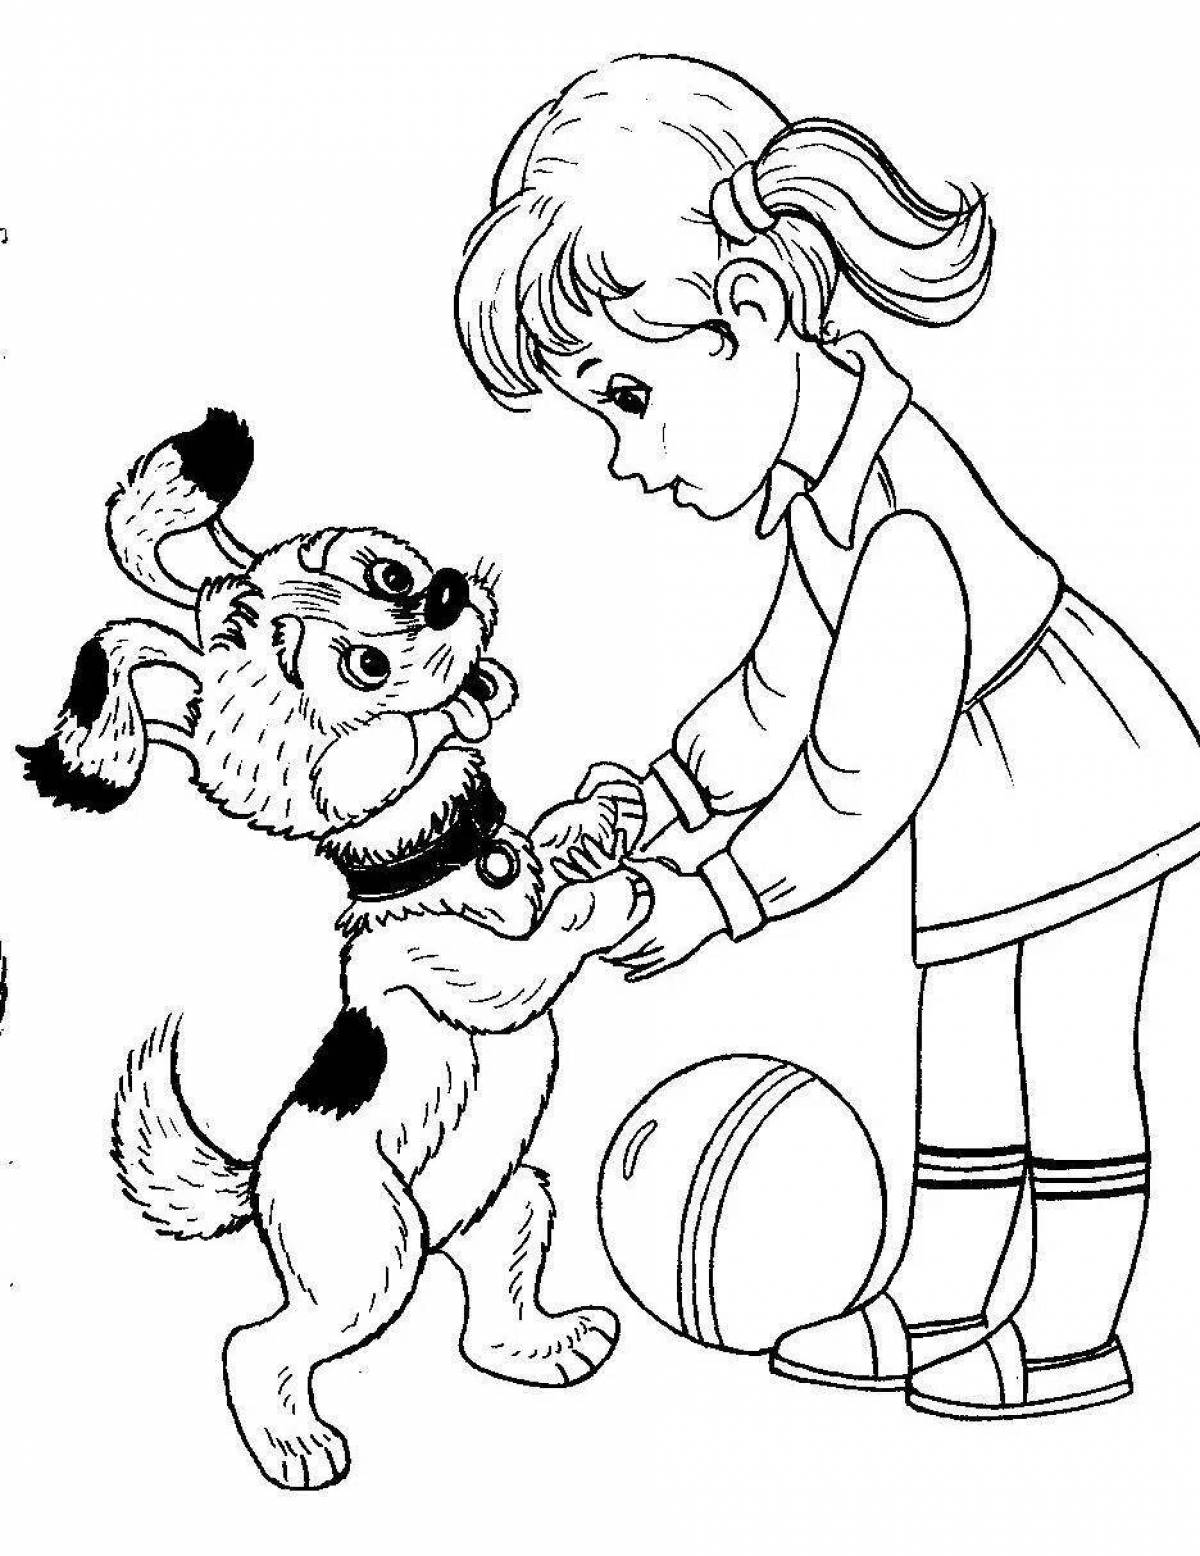 Inspirational kindness coloring page